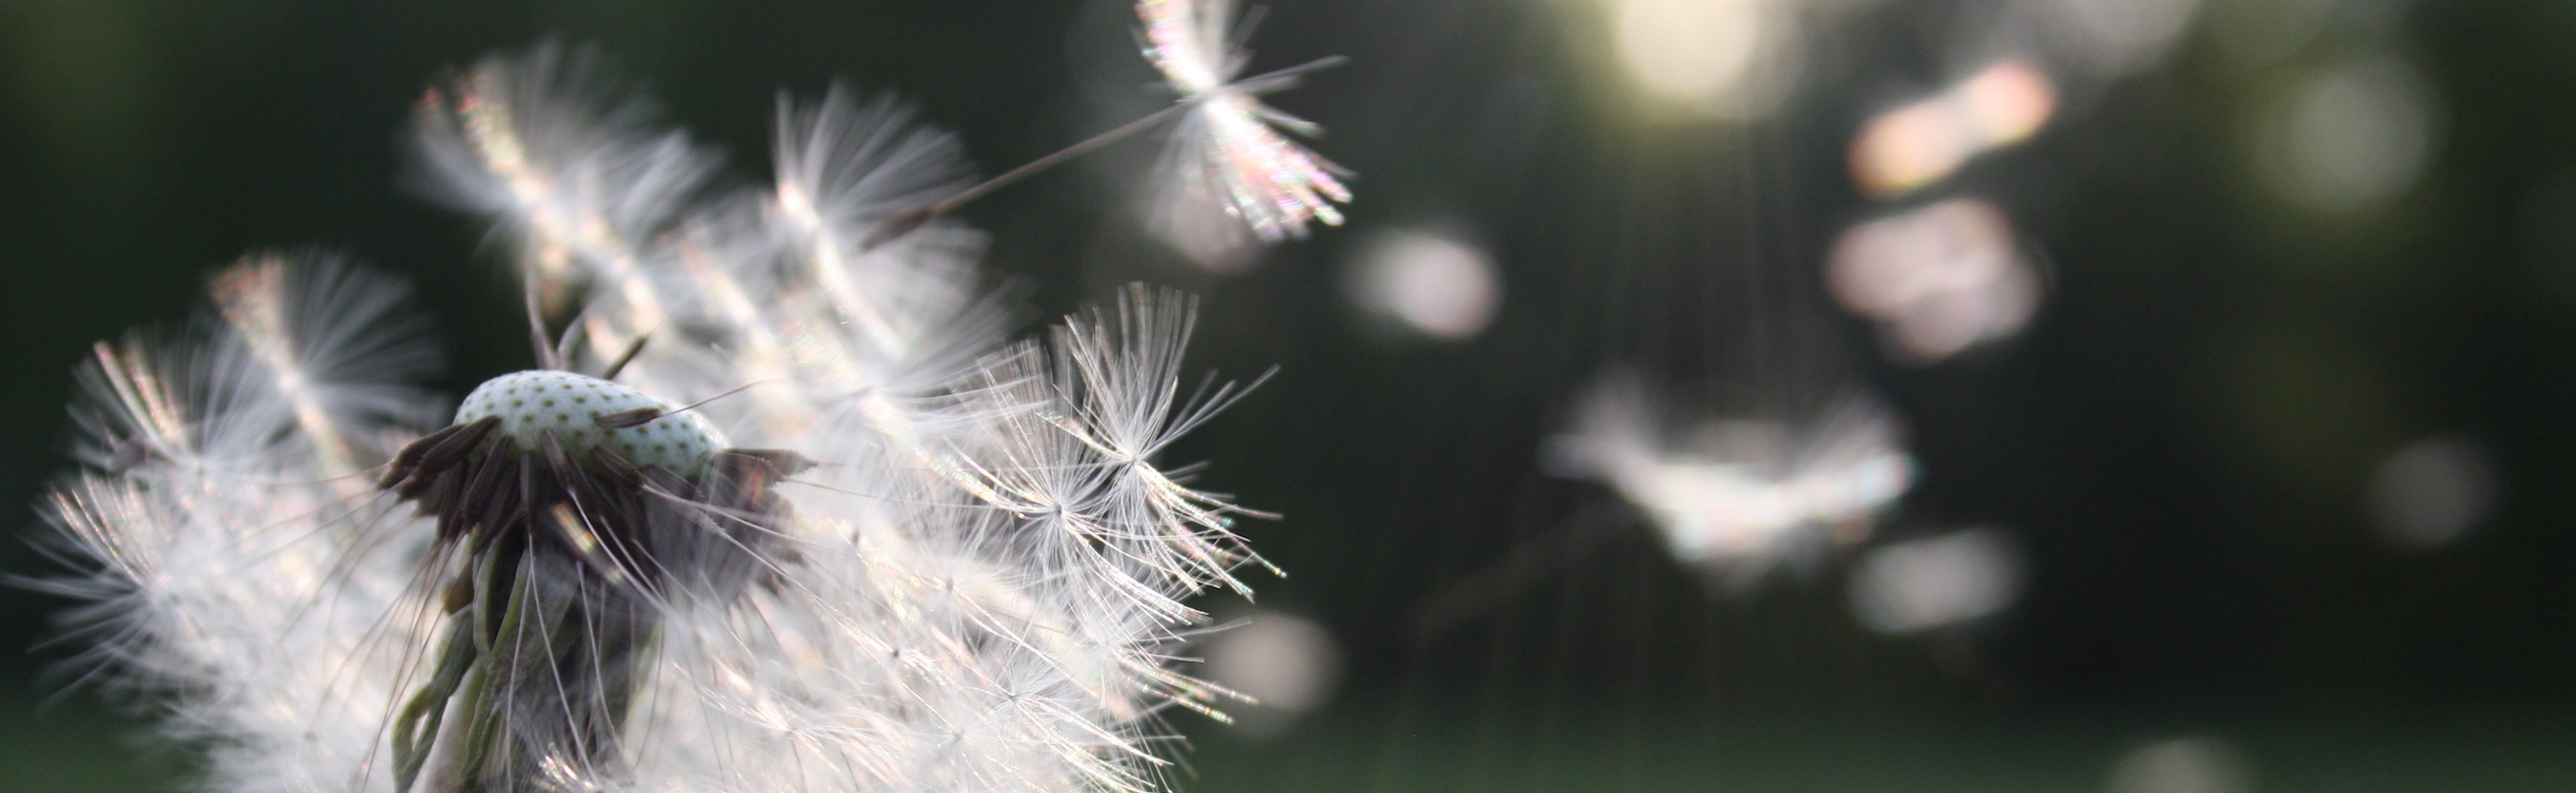 Dandelion with blowing seeds